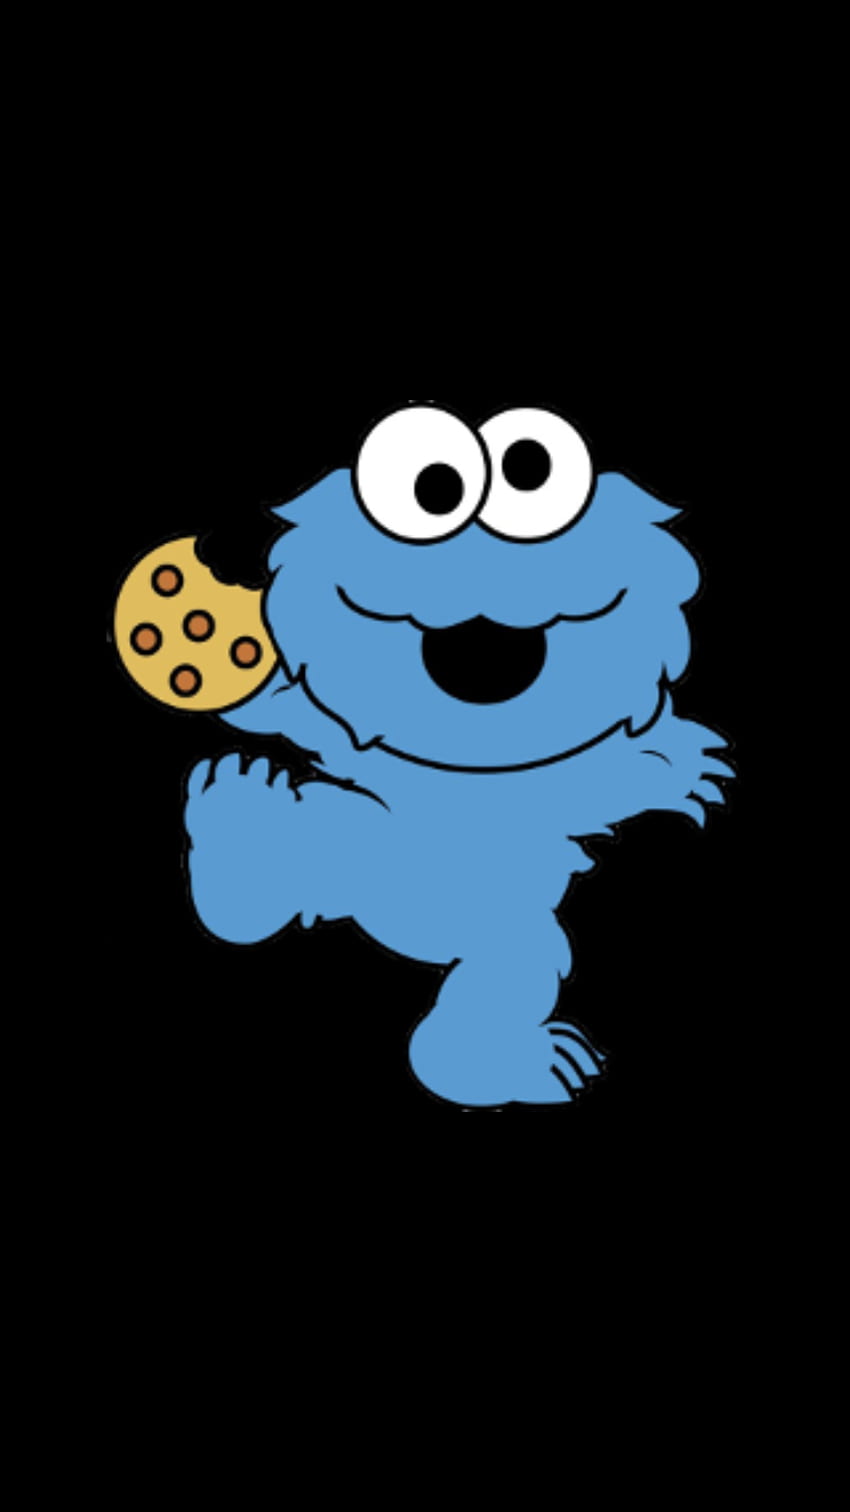  Be Positive   COOKIE MONSTER  ELMO WALLPAPERS From Duitang